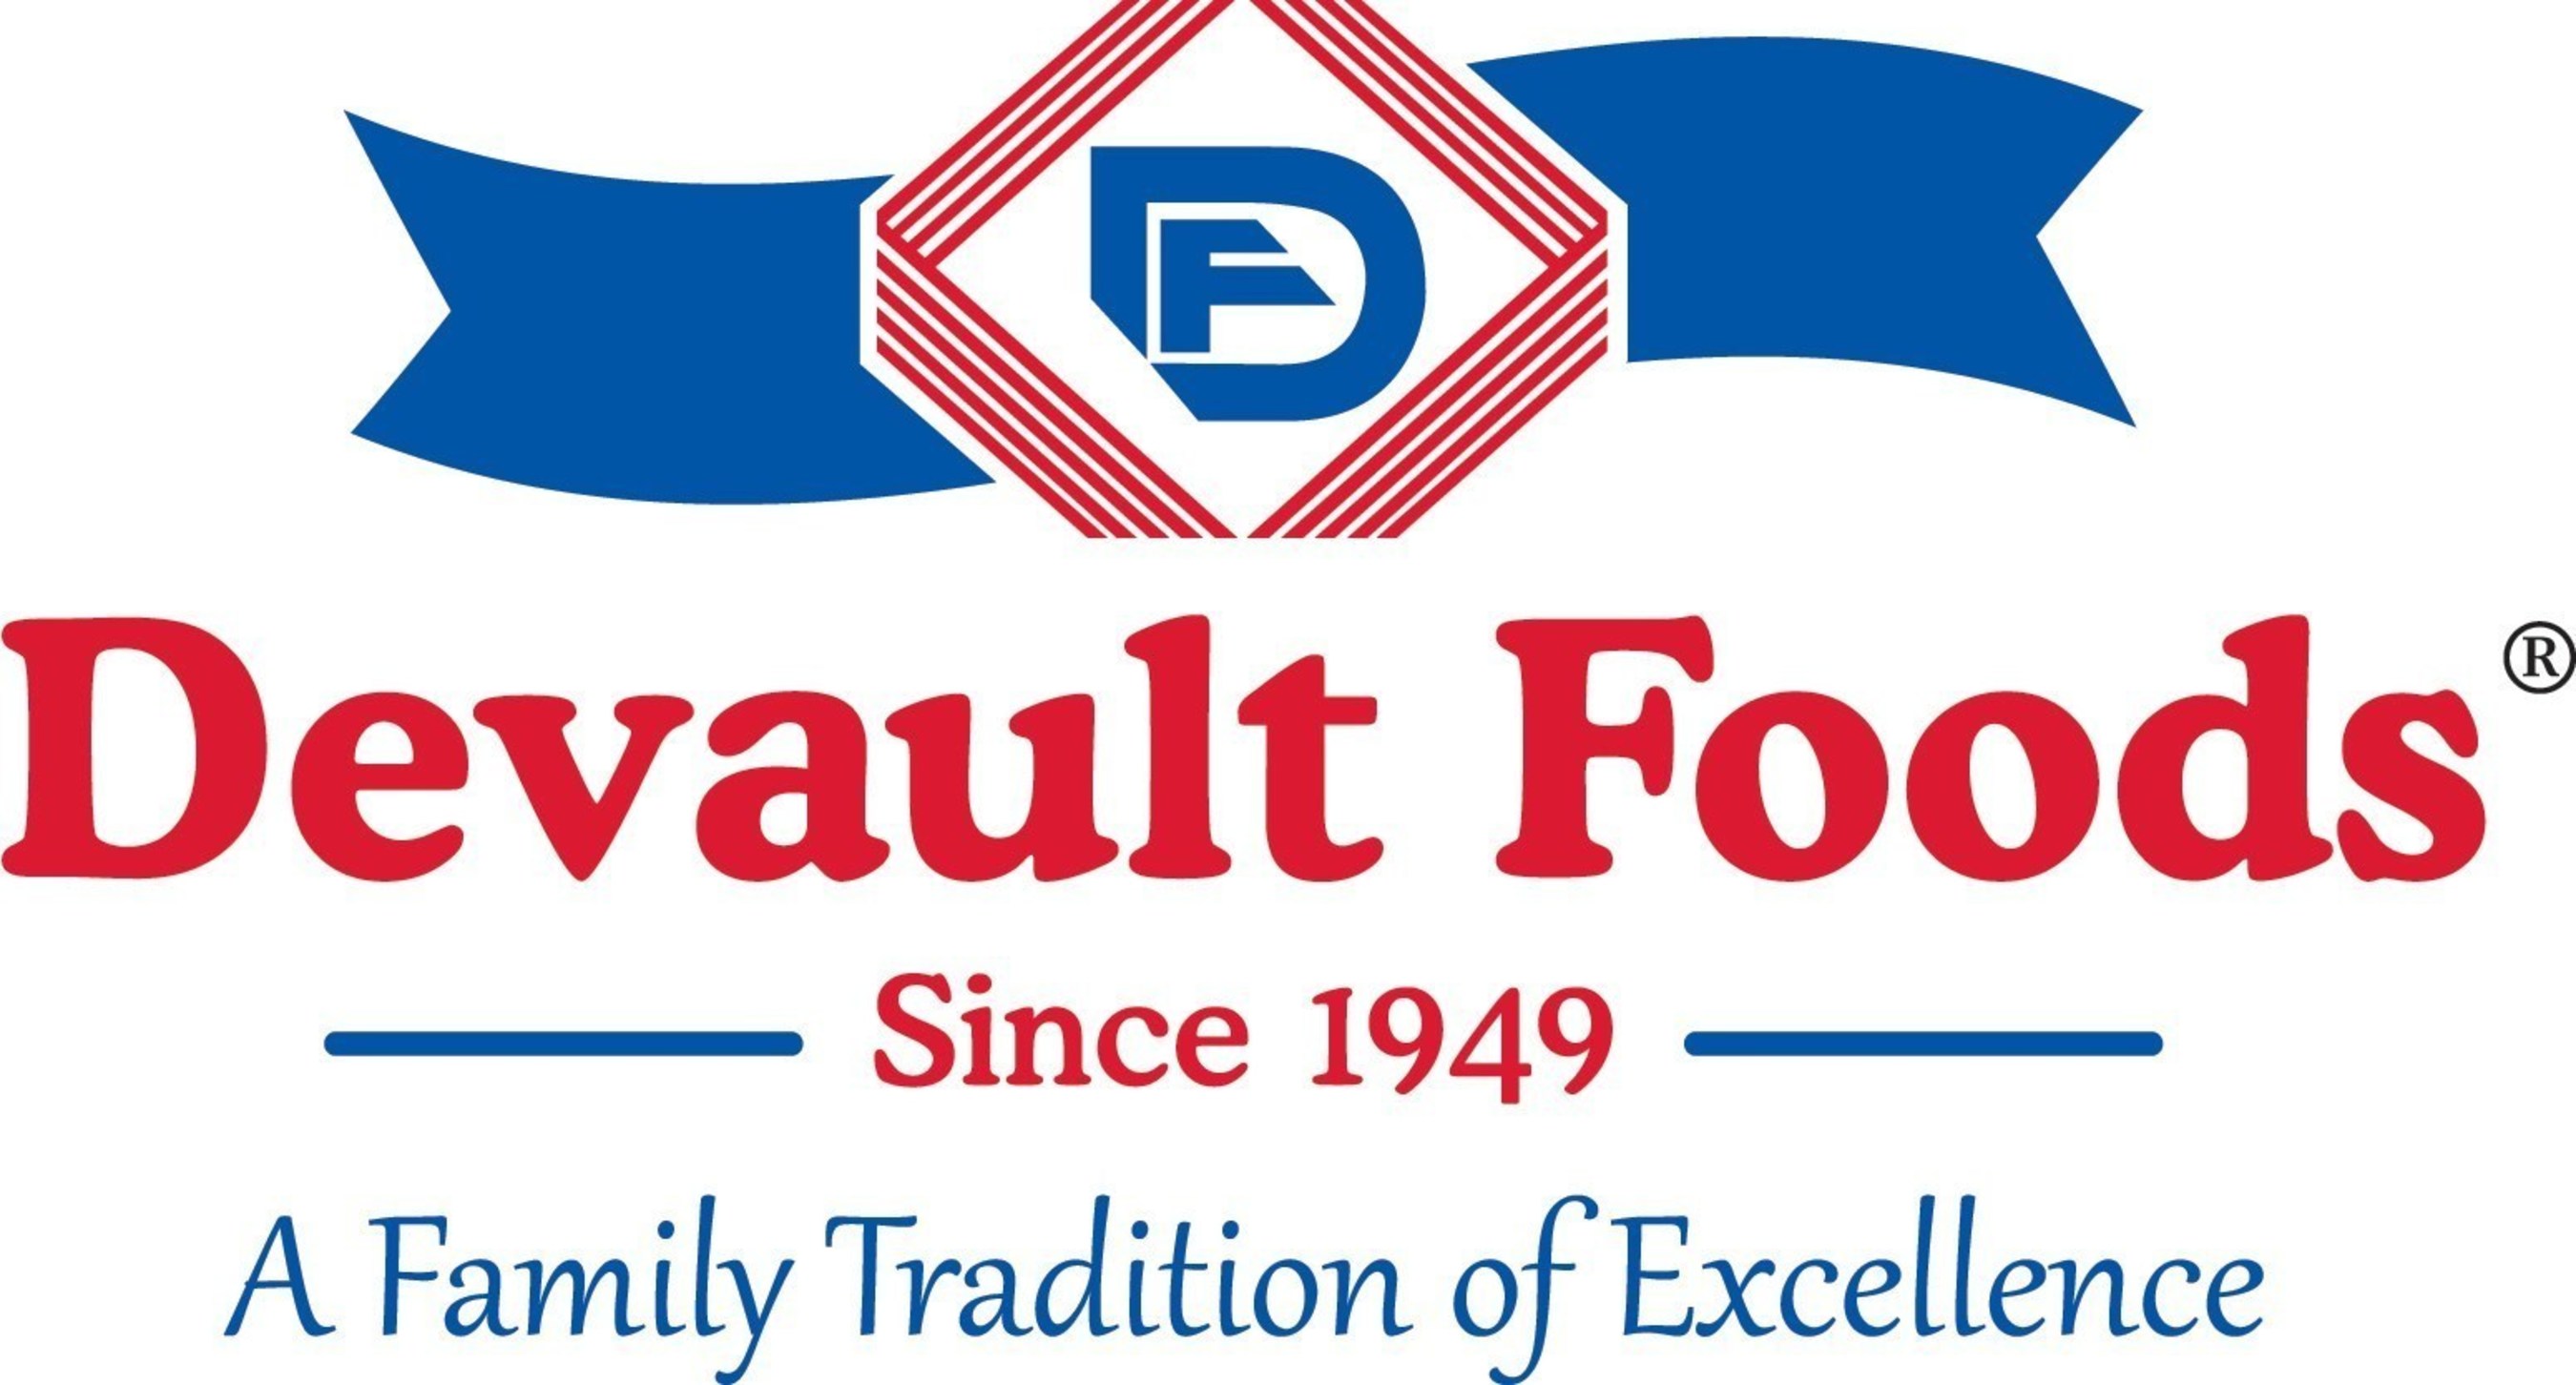 A Family Tradition of Excellence Since 1949.